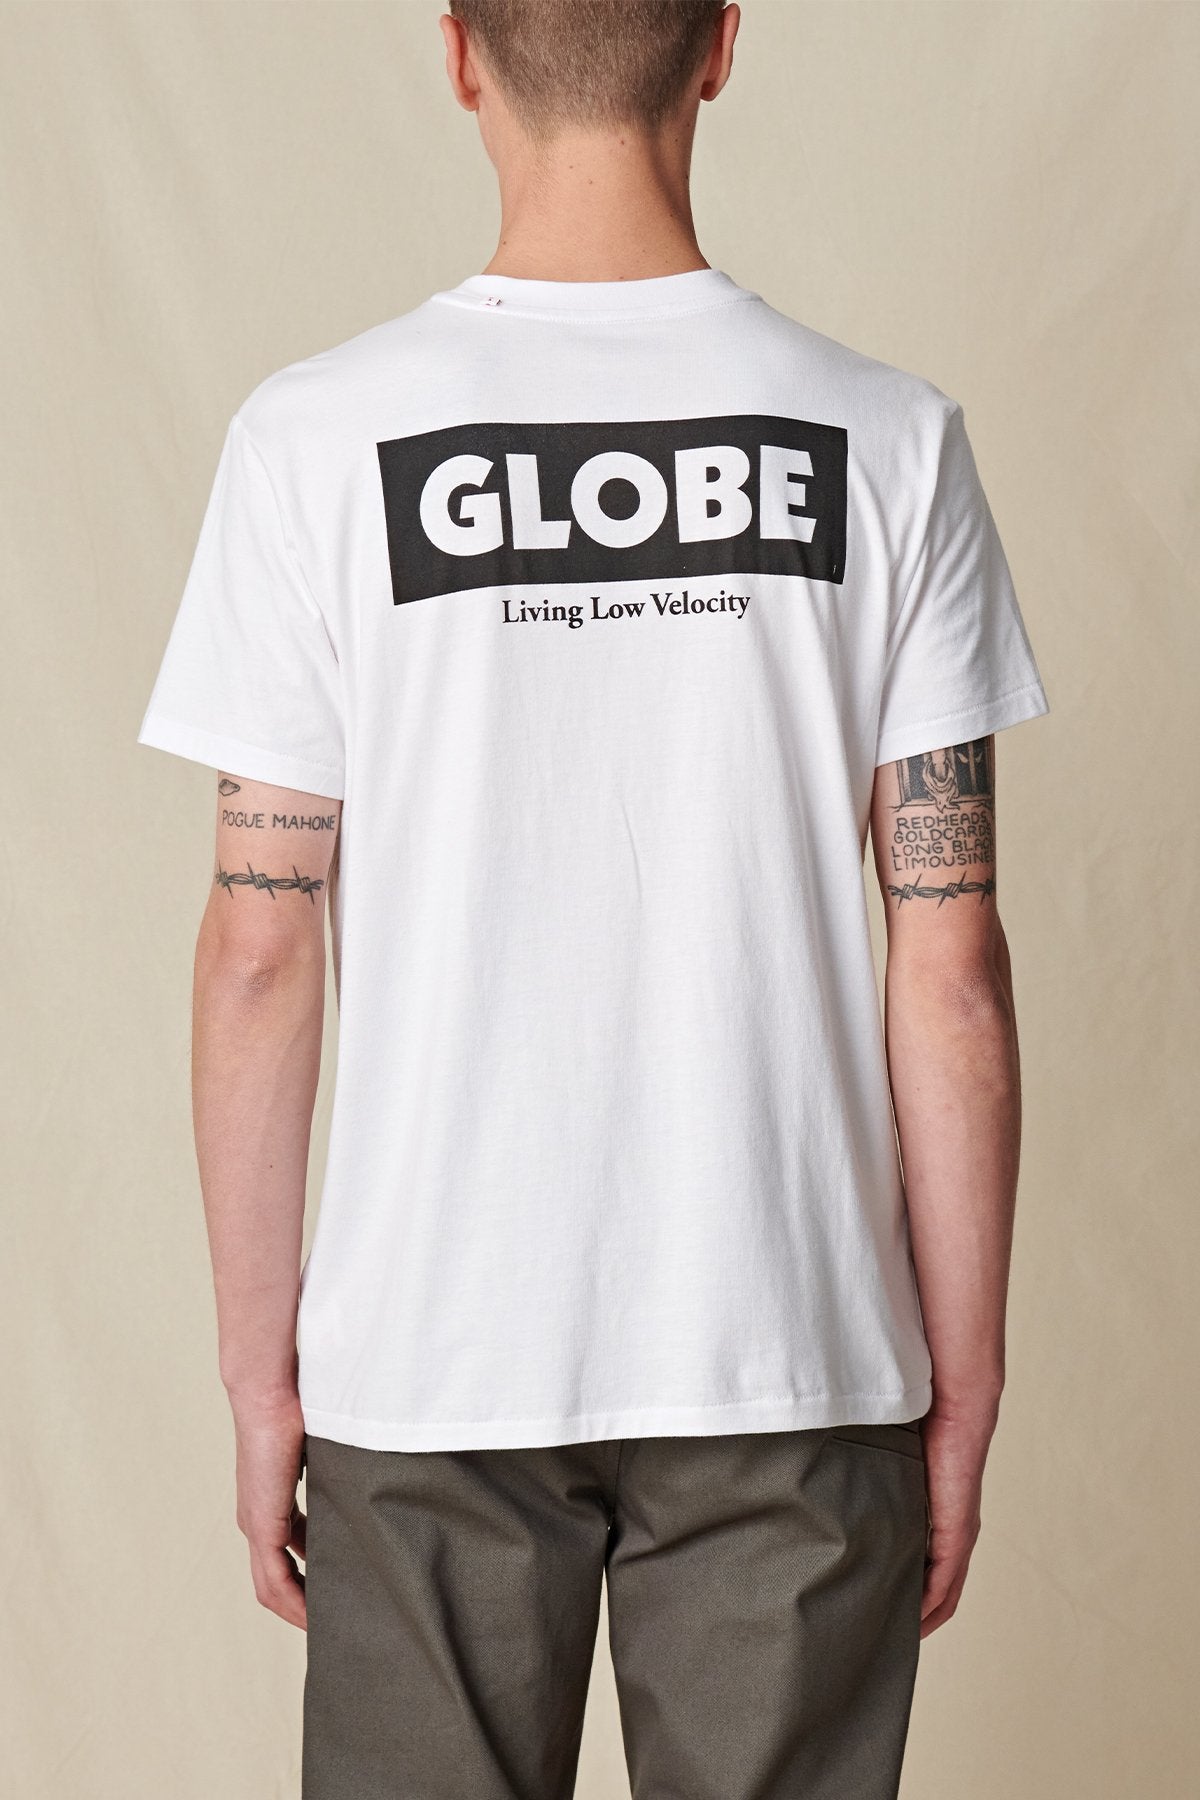 Globe T-shirts - Living Low Velocity Tee in White